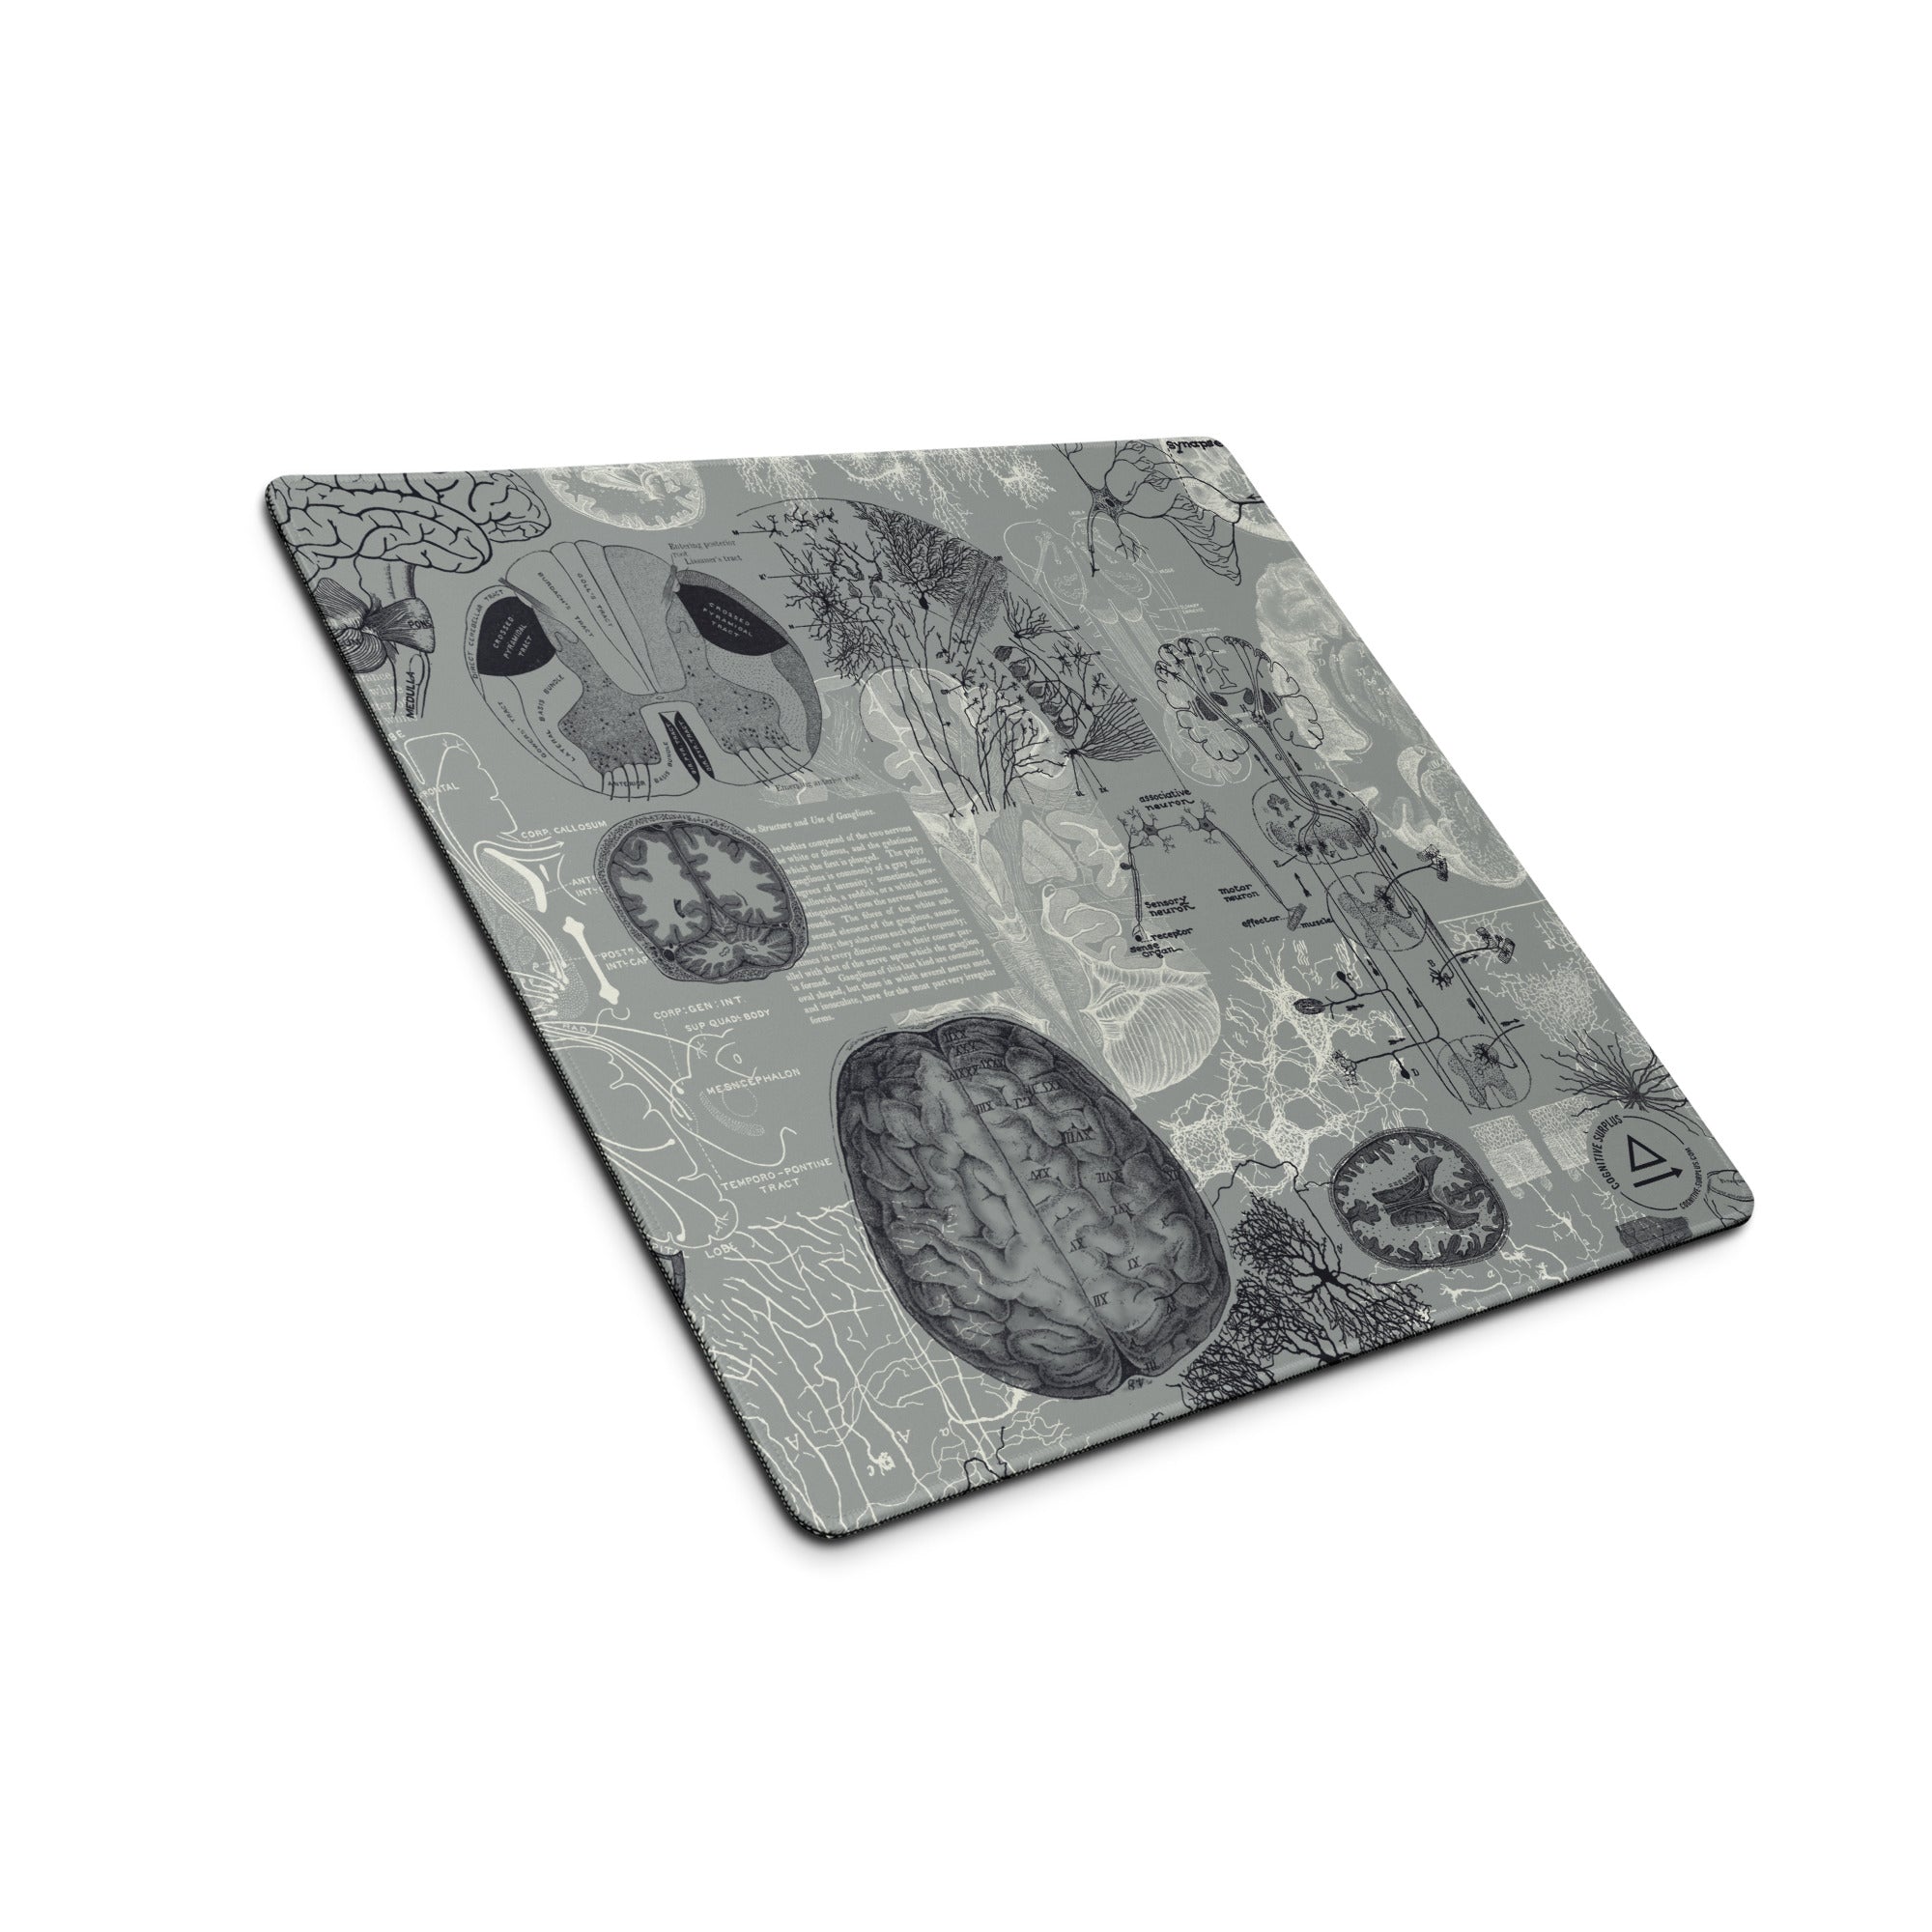 gaming-mouse-pad-white-18x16-front-6595e8af5692f.jpg